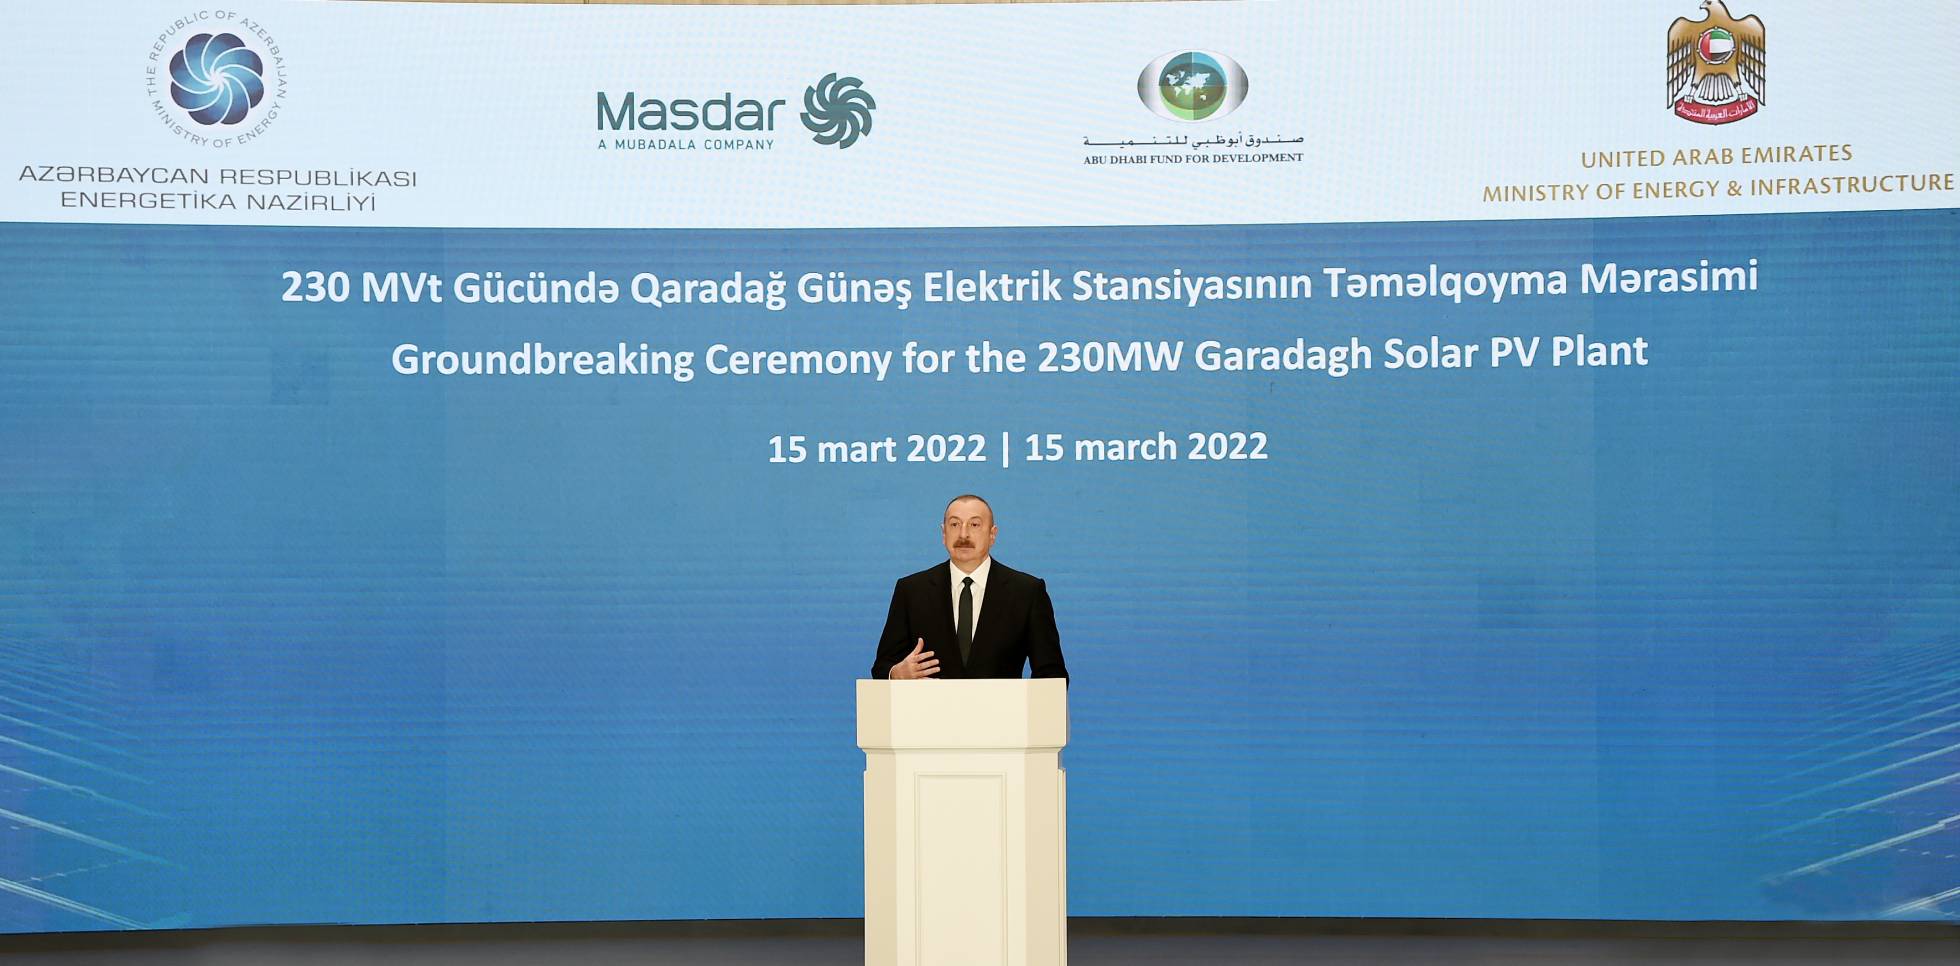 A groundbreaking ceremony has been held for the 230 MW Garadagh Solar Power Plant